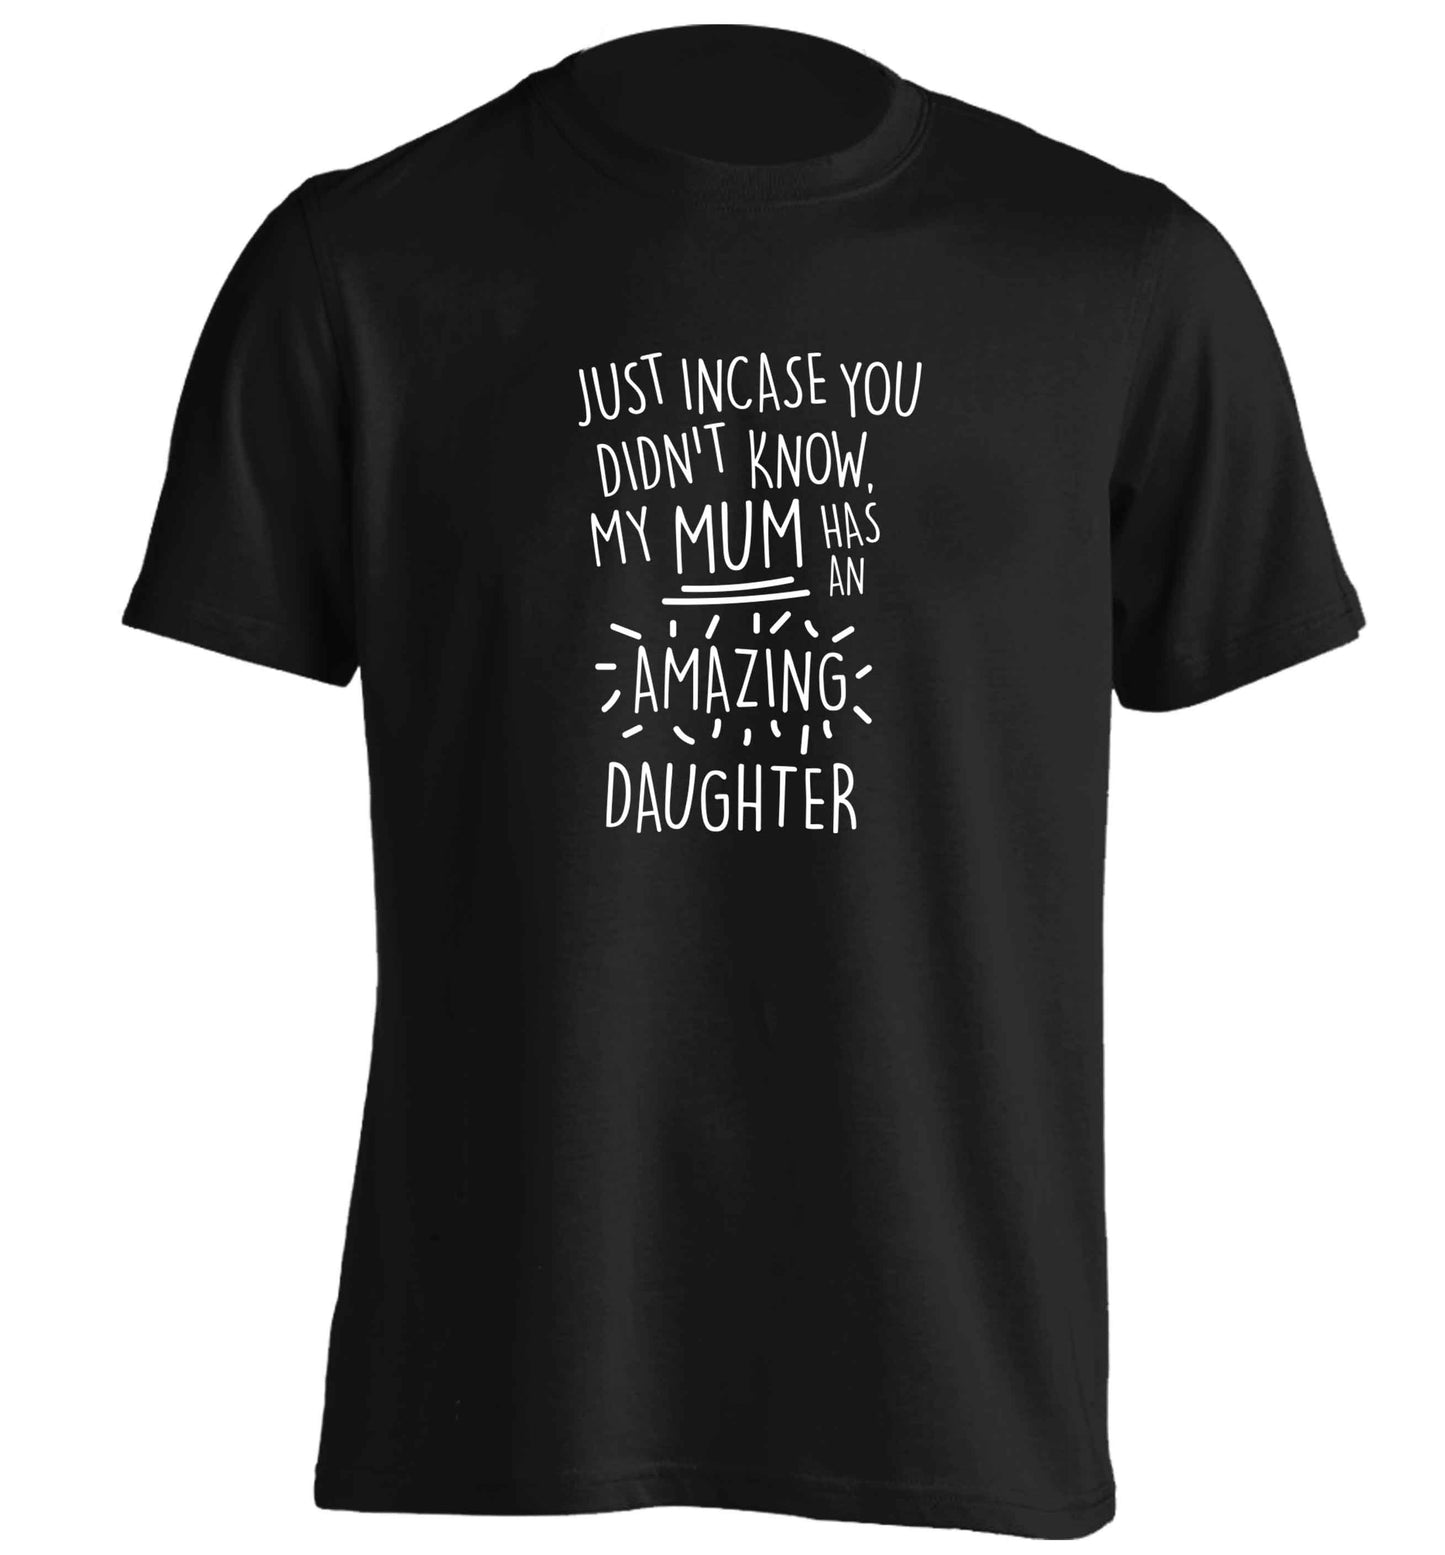 Just incase you didn't know my mum has an amazing daughter adults unisex black Tshirt 2XL